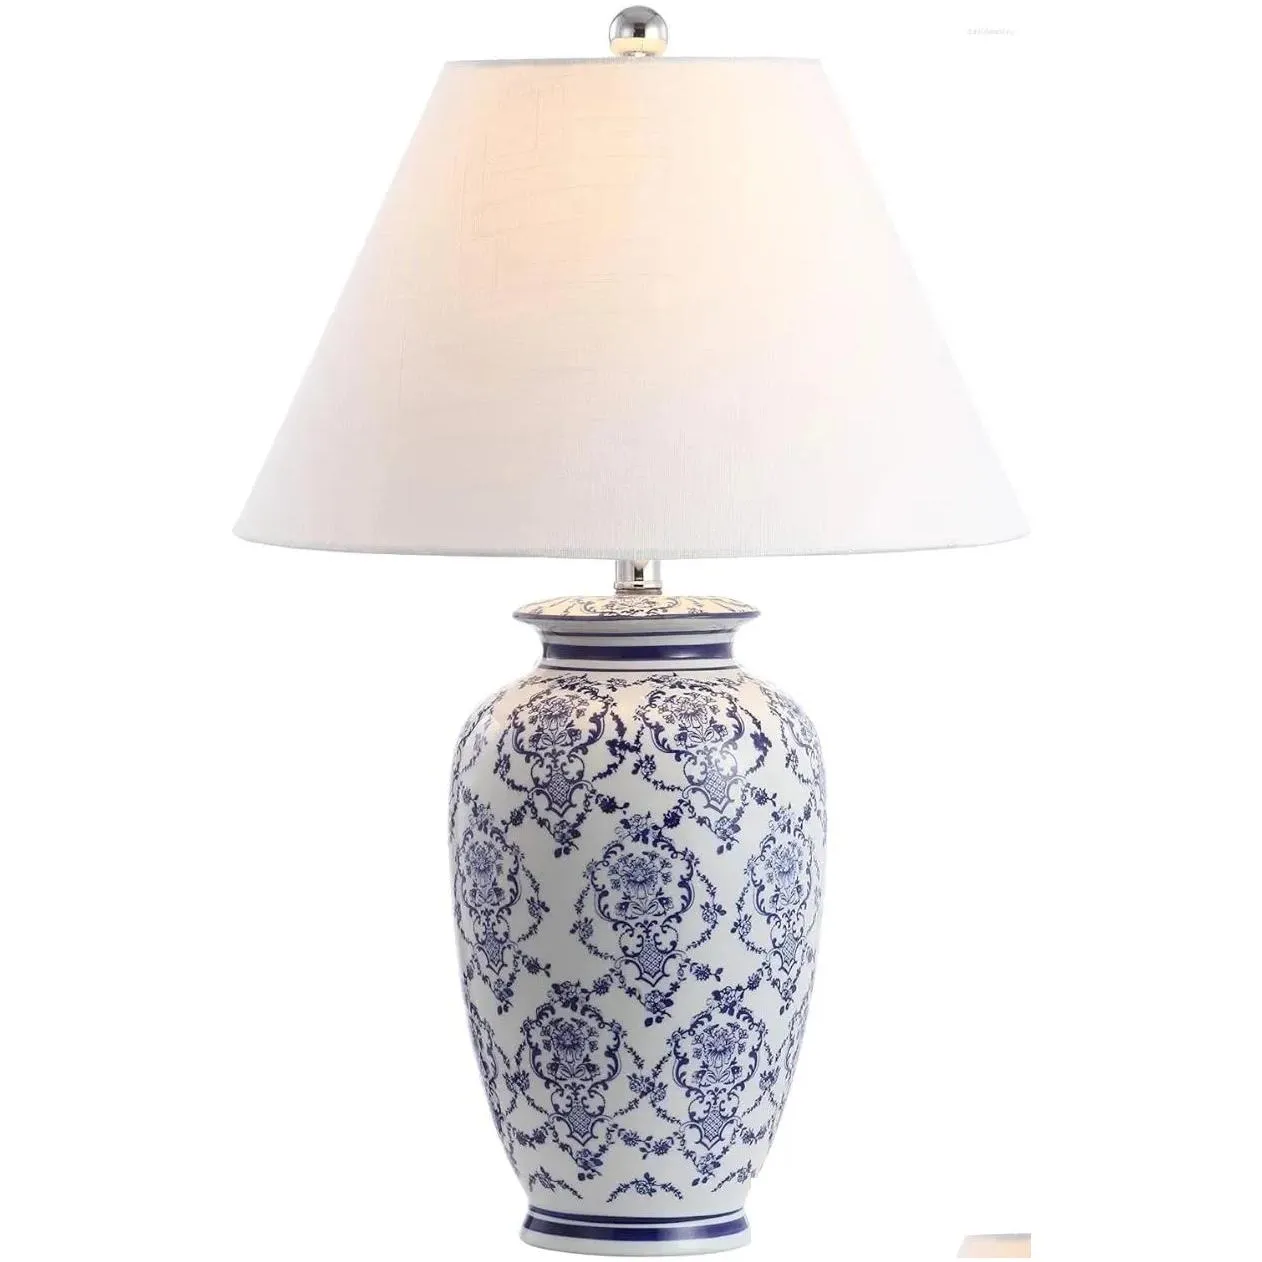 Table Lamps Jiana 26.25 Chinoiserie Ceramic Led Traditional Bedside Desk Nightstand Lamp For Bedroom Living Room Office College Drop Dhlgs